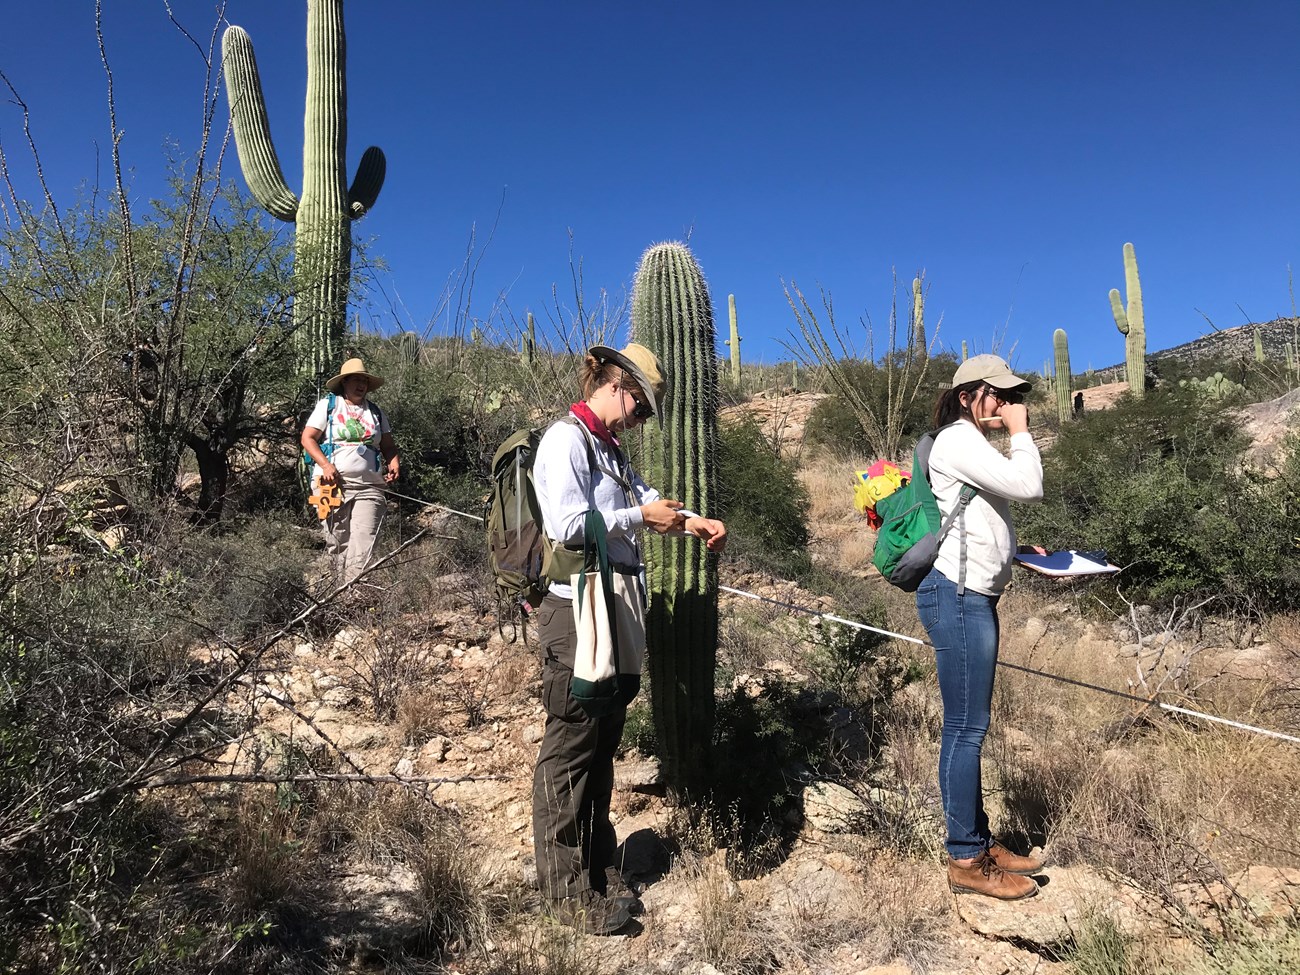 Volunteers communicating and working together to find the height of a saguaro